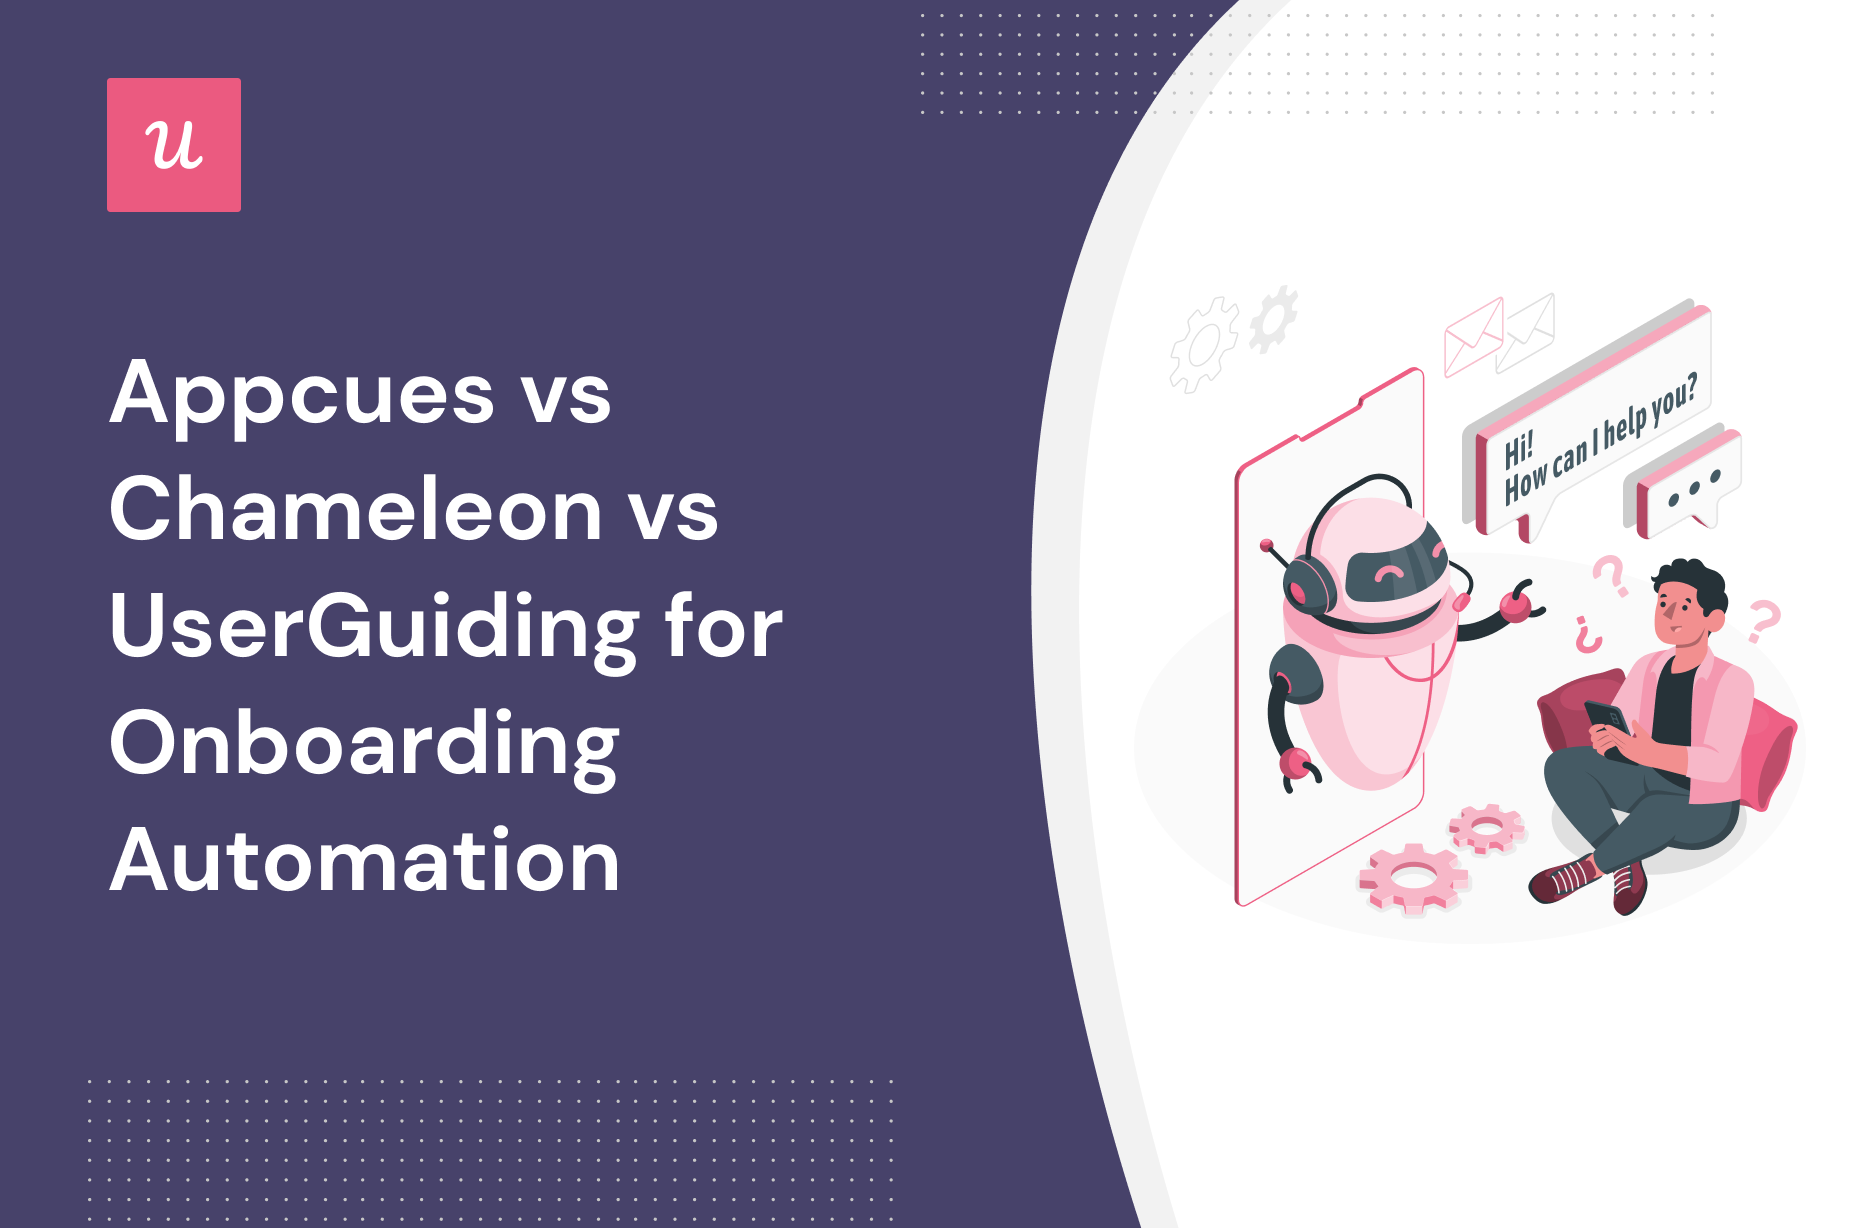 Appcues vs Chameleon vs UserGuiding for Onboarding Automation